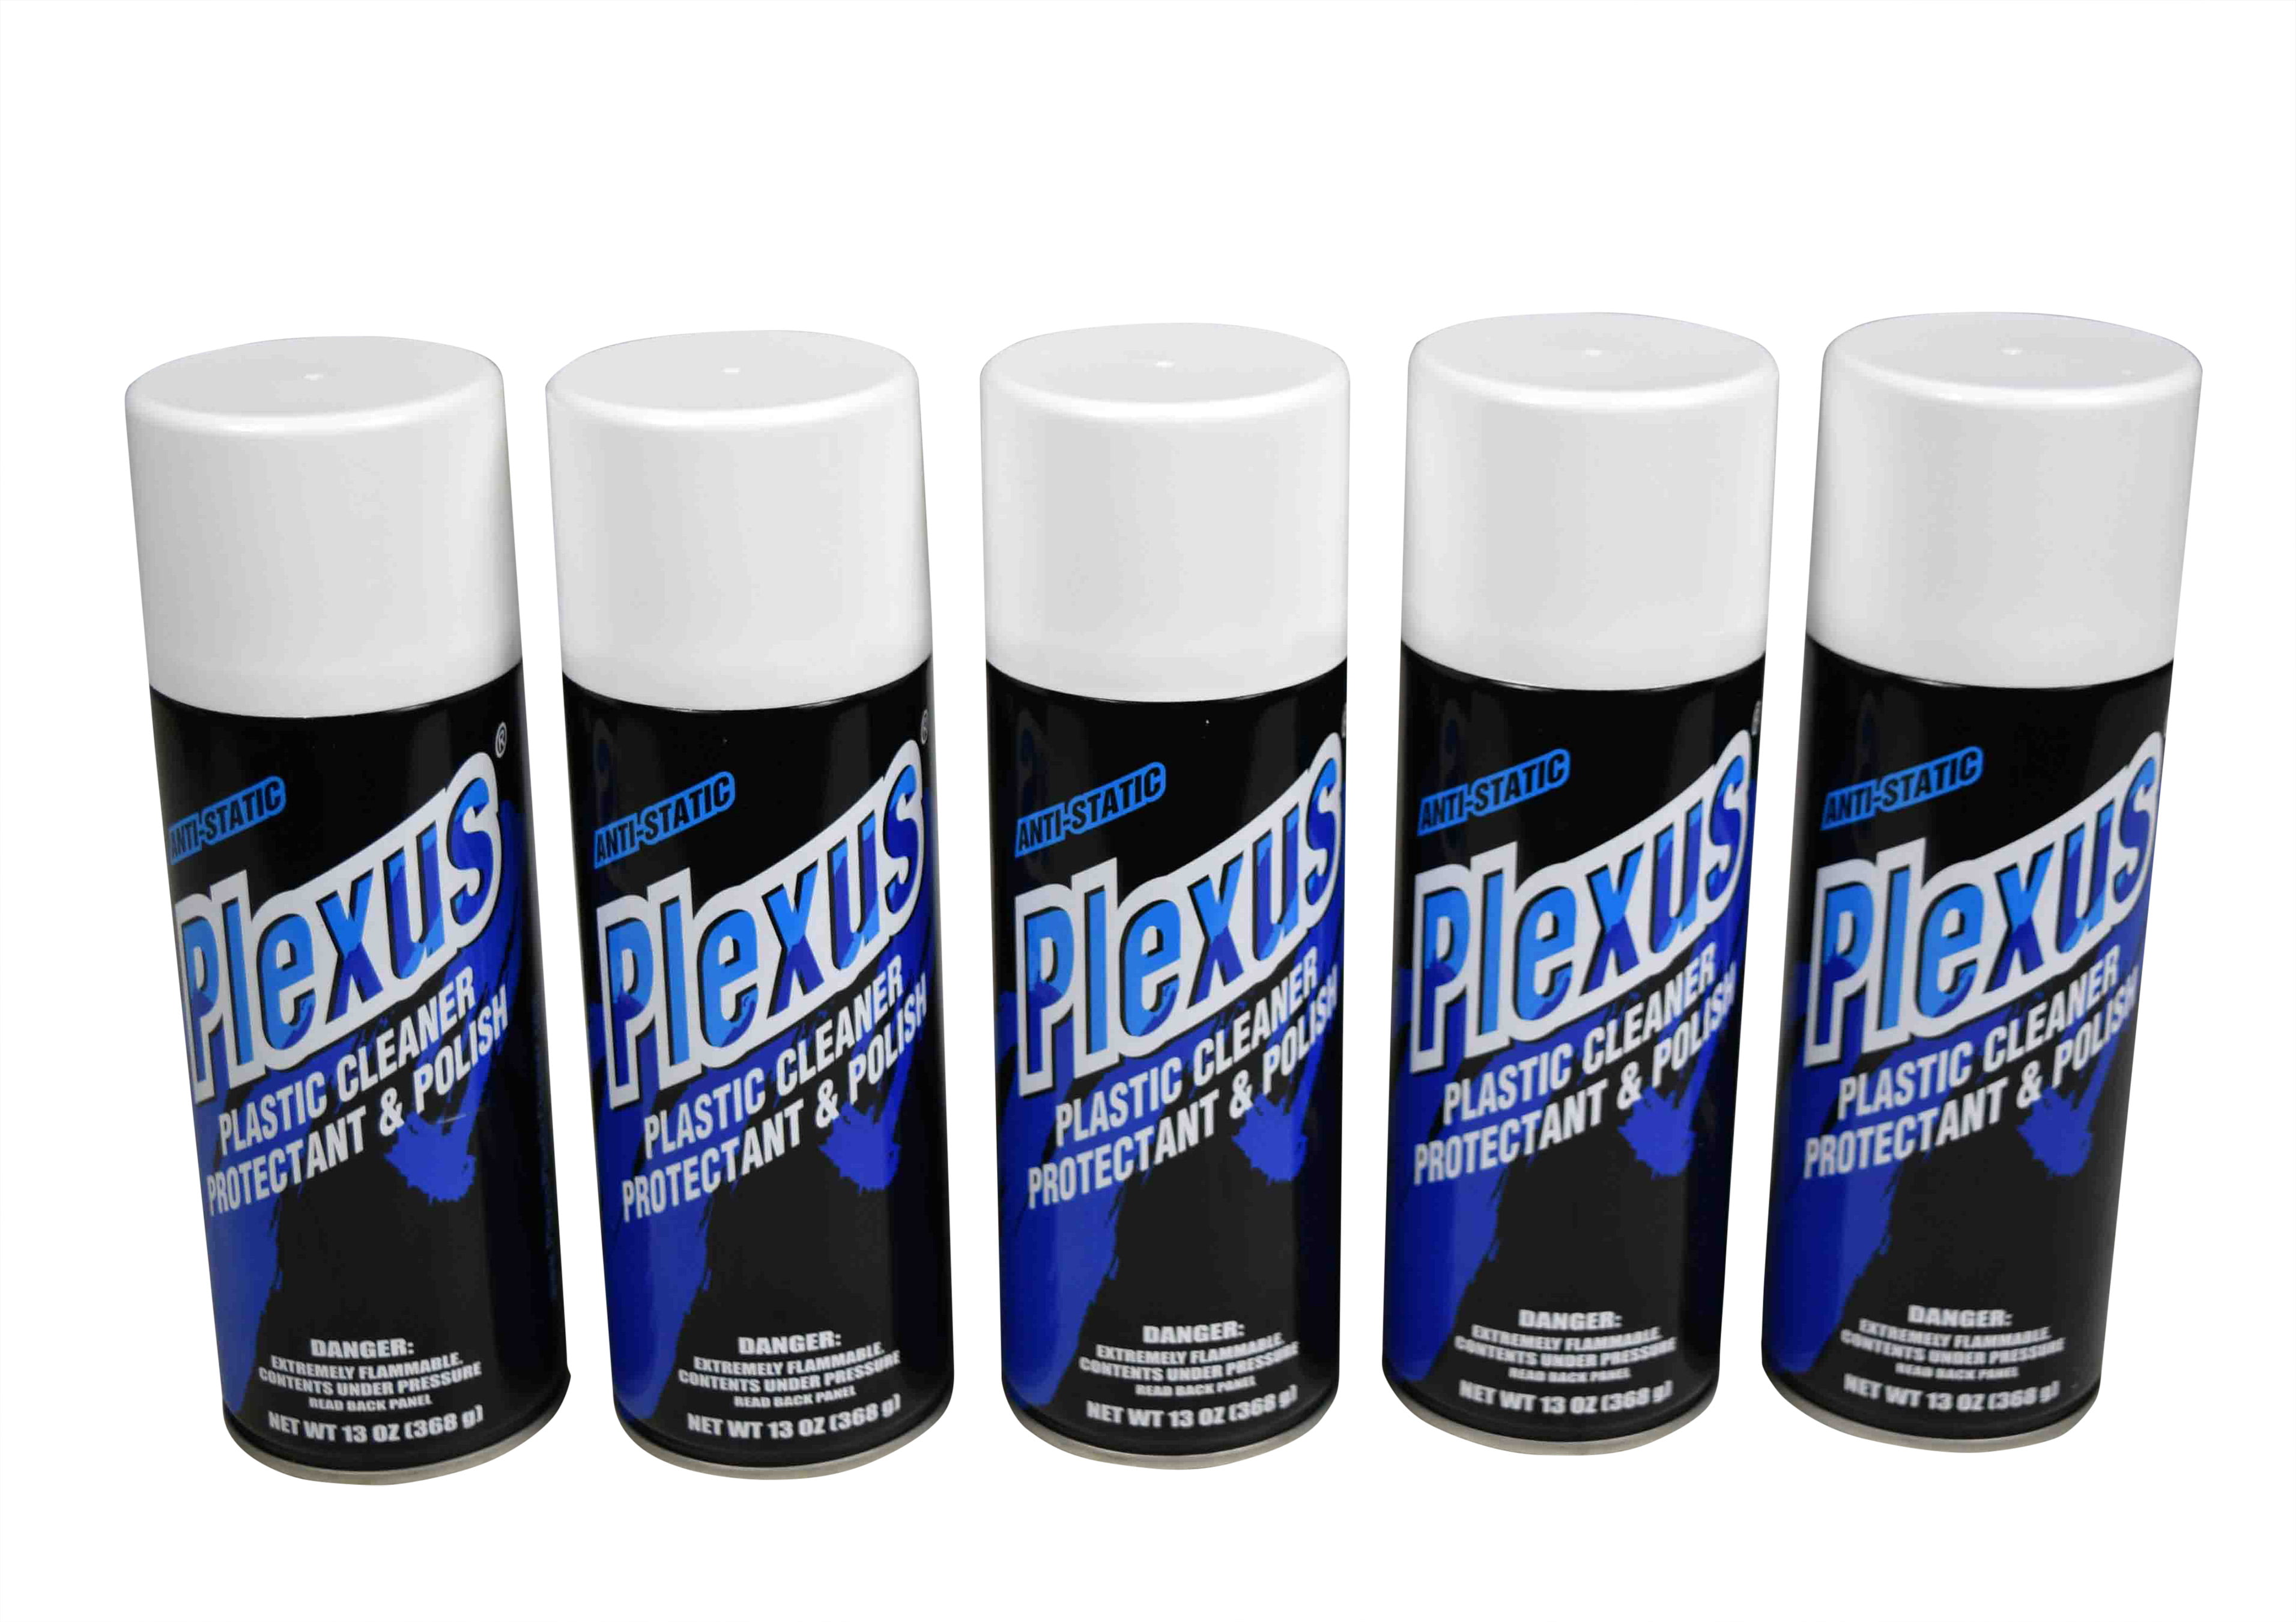 13 oz Plexus Plastic Cleaner Protectant and Polish Anti-Static - 20214 -  NEW! for sale online